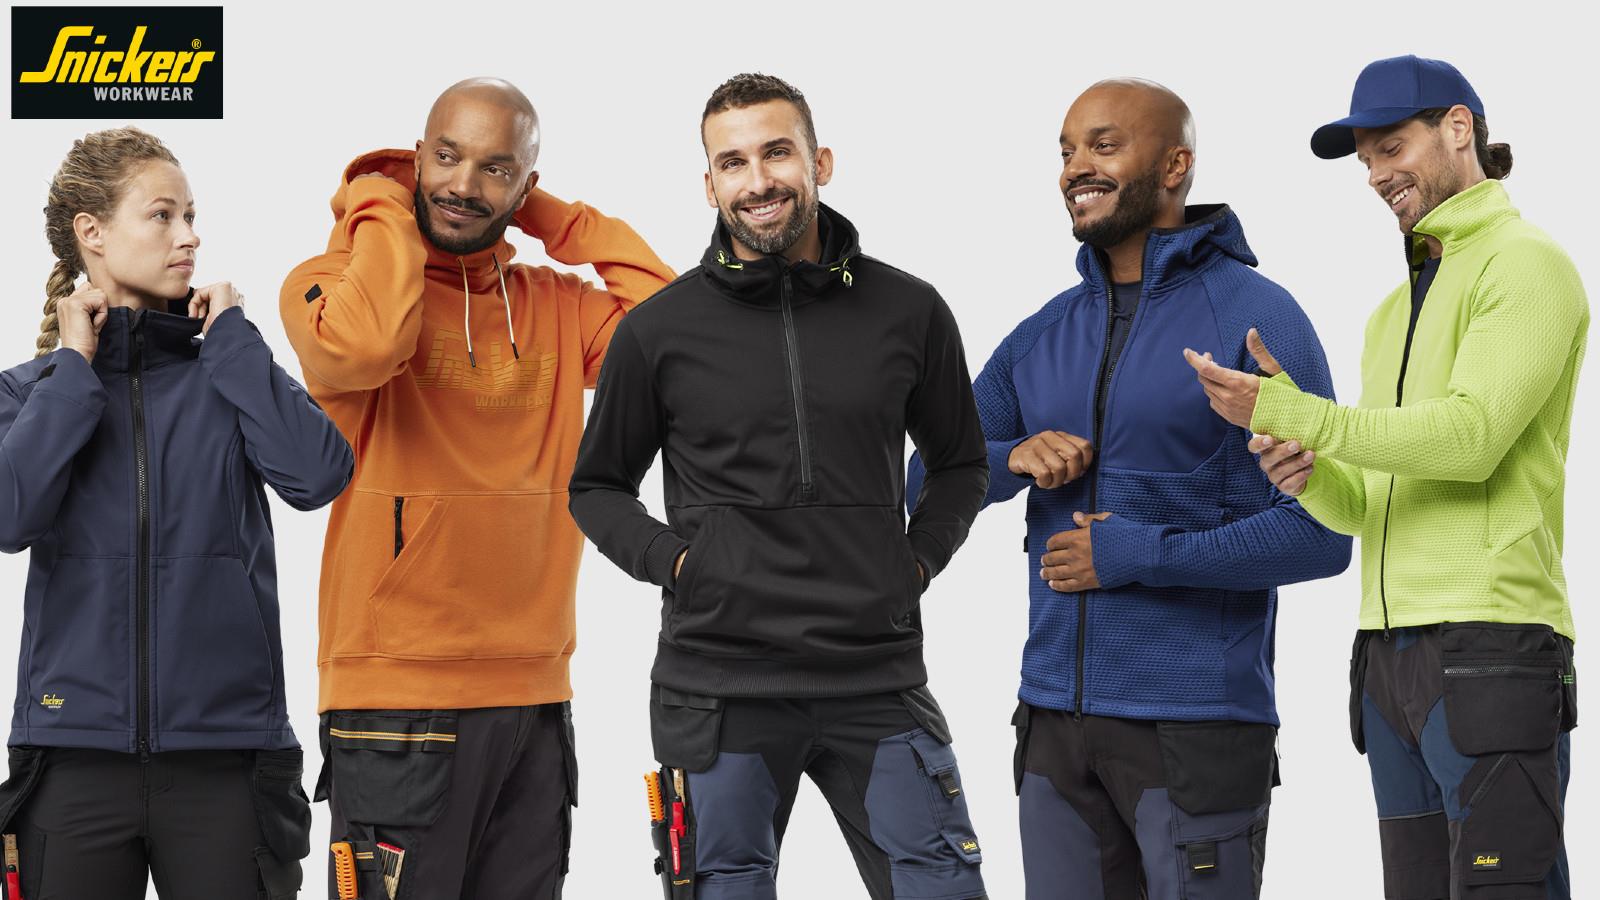 Snickers Workwear’s New Wind-Protective Jackets and Hoodies image